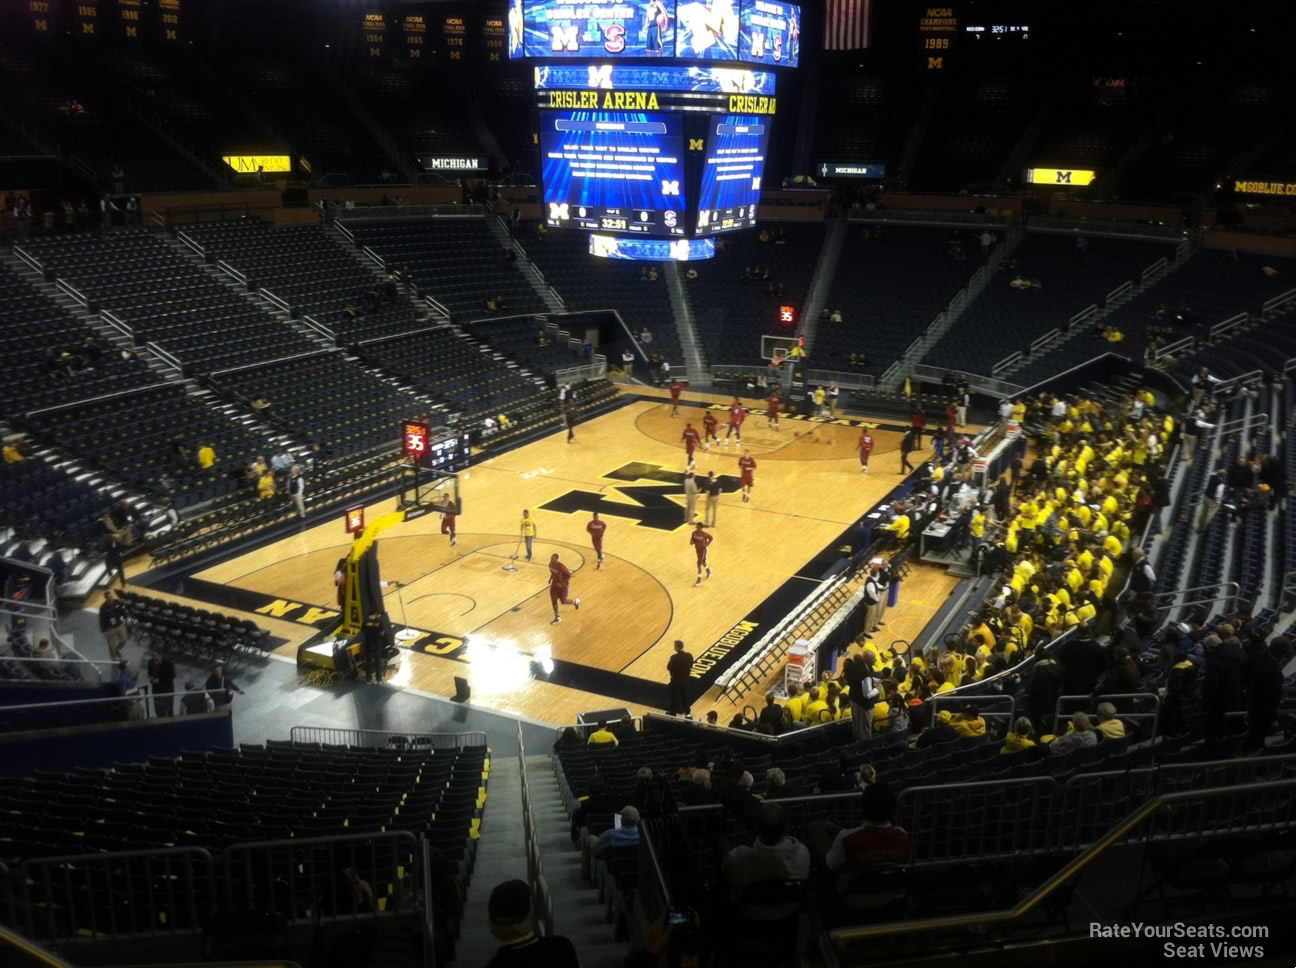 section 229, row 28 seat view  - crisler center